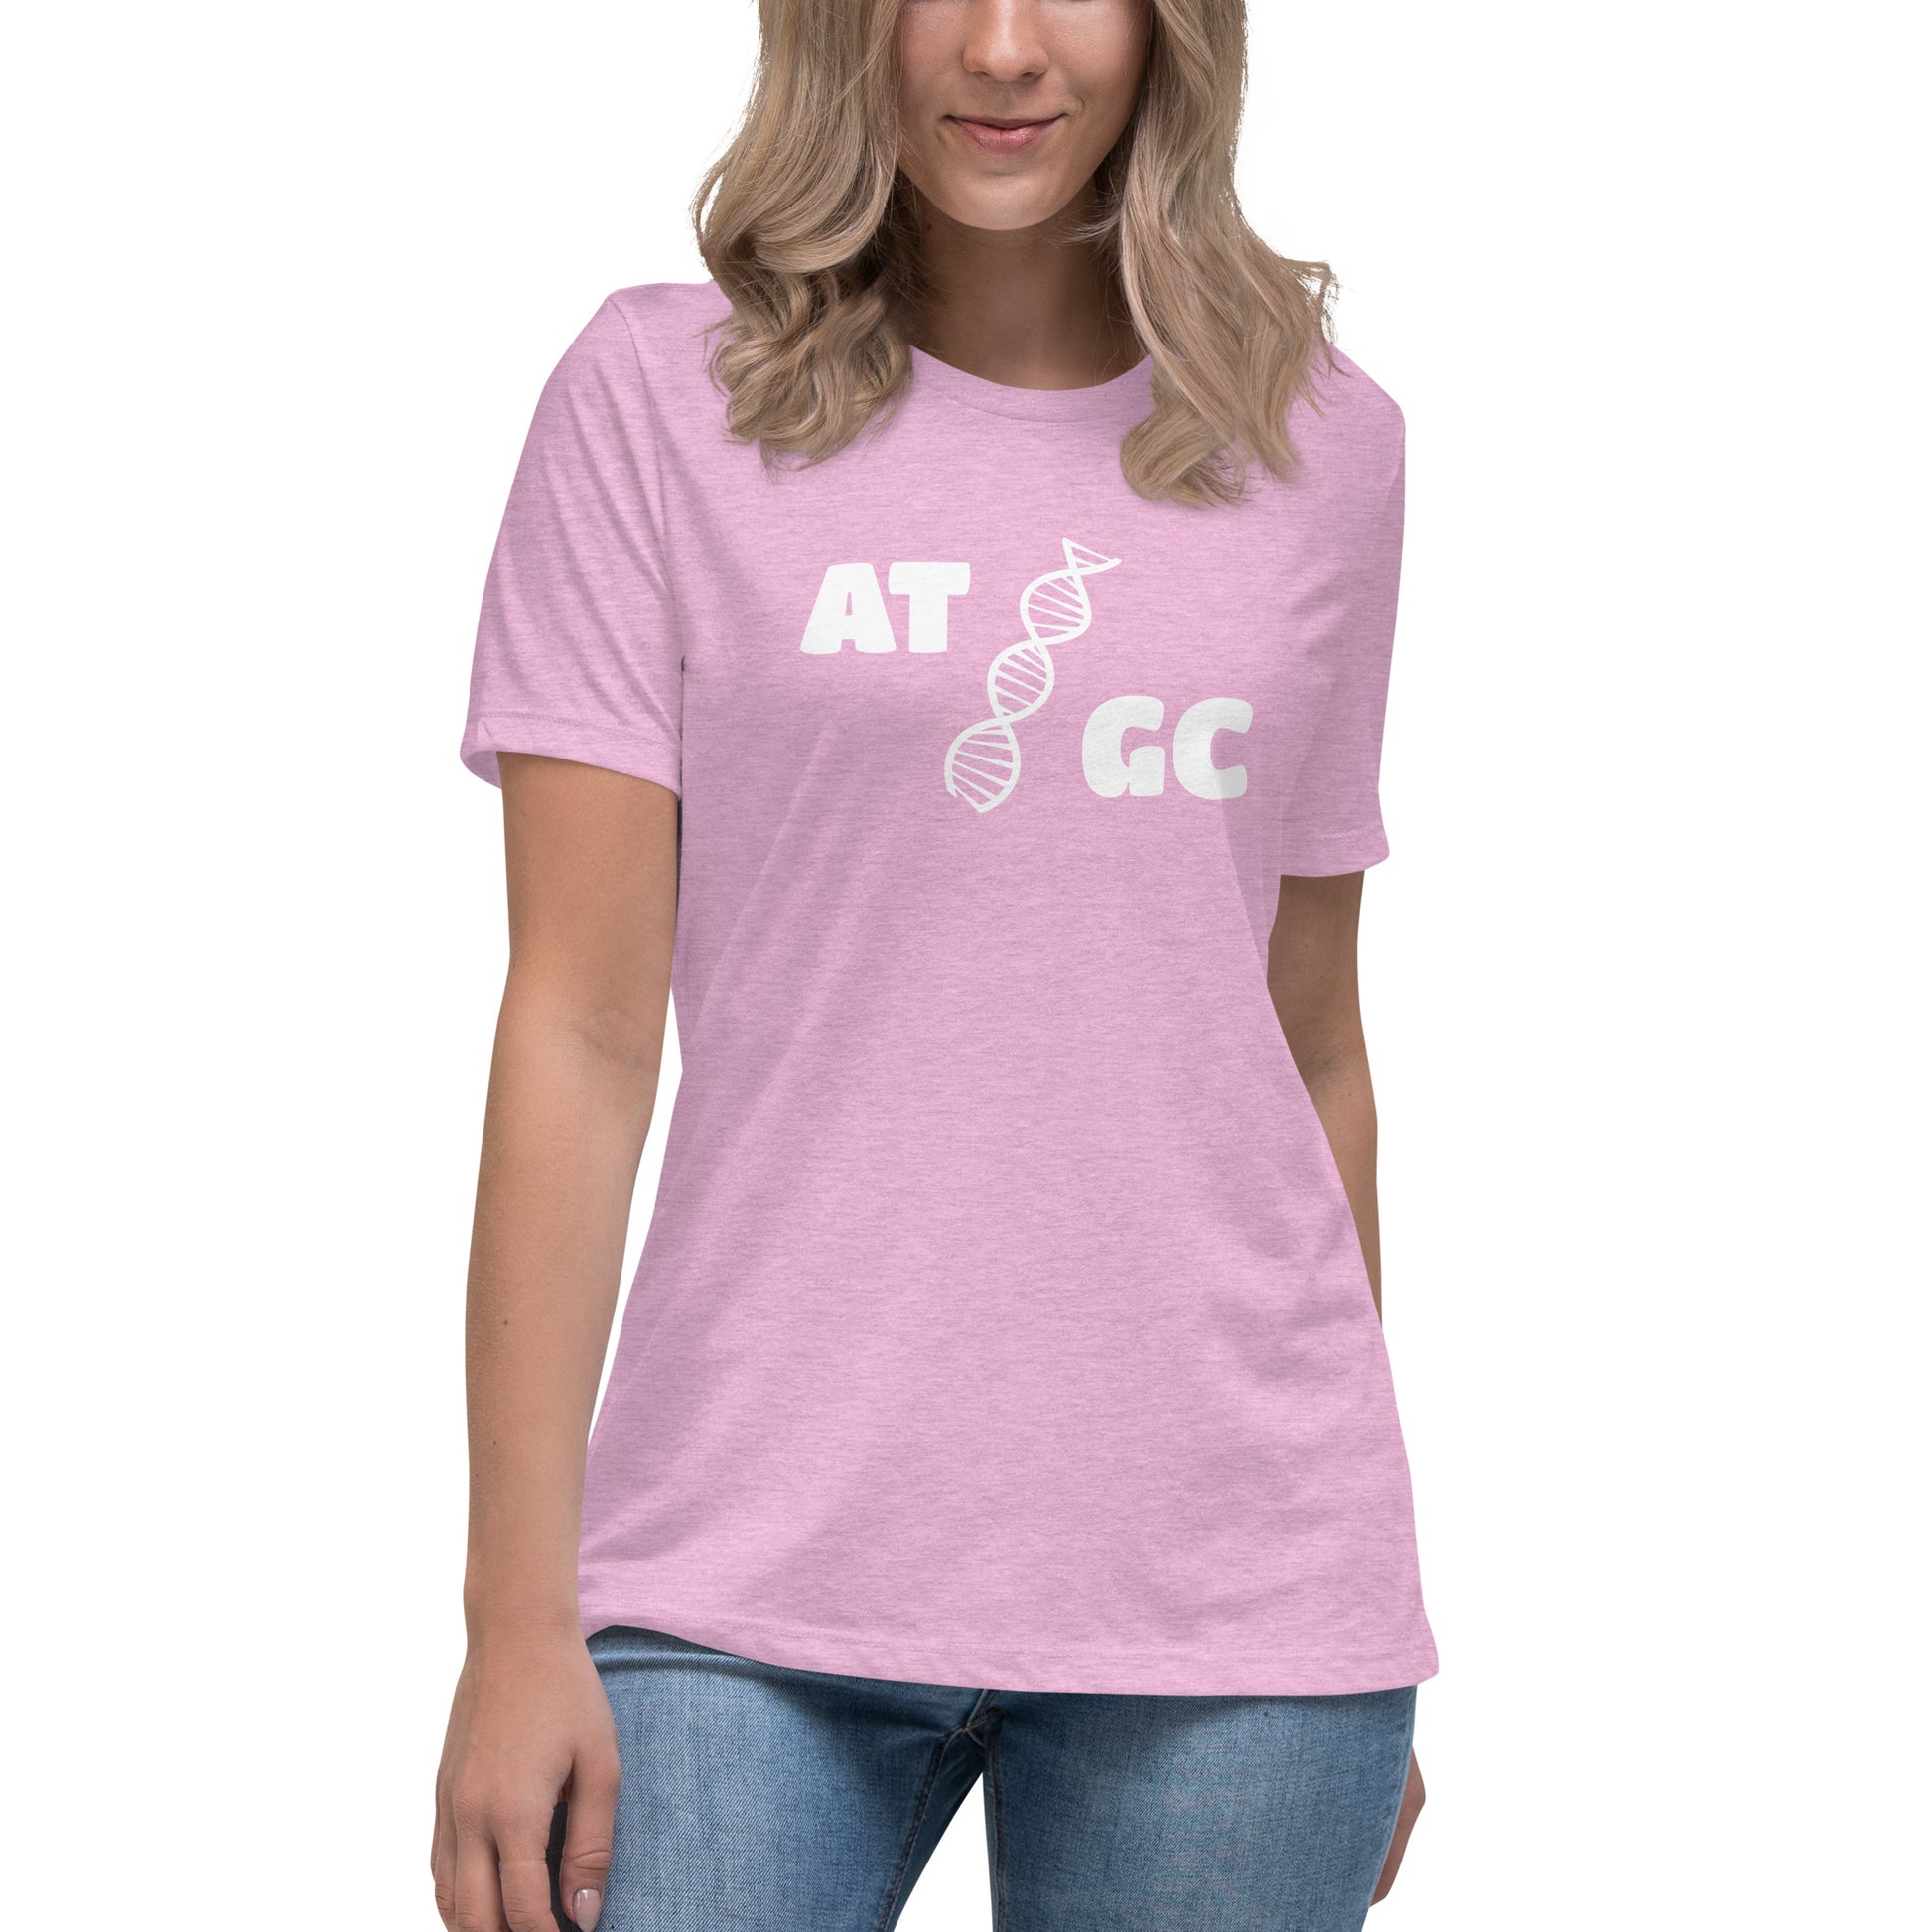 Women with lilac t-shirt with image of a DNA string and the text "ATGC"